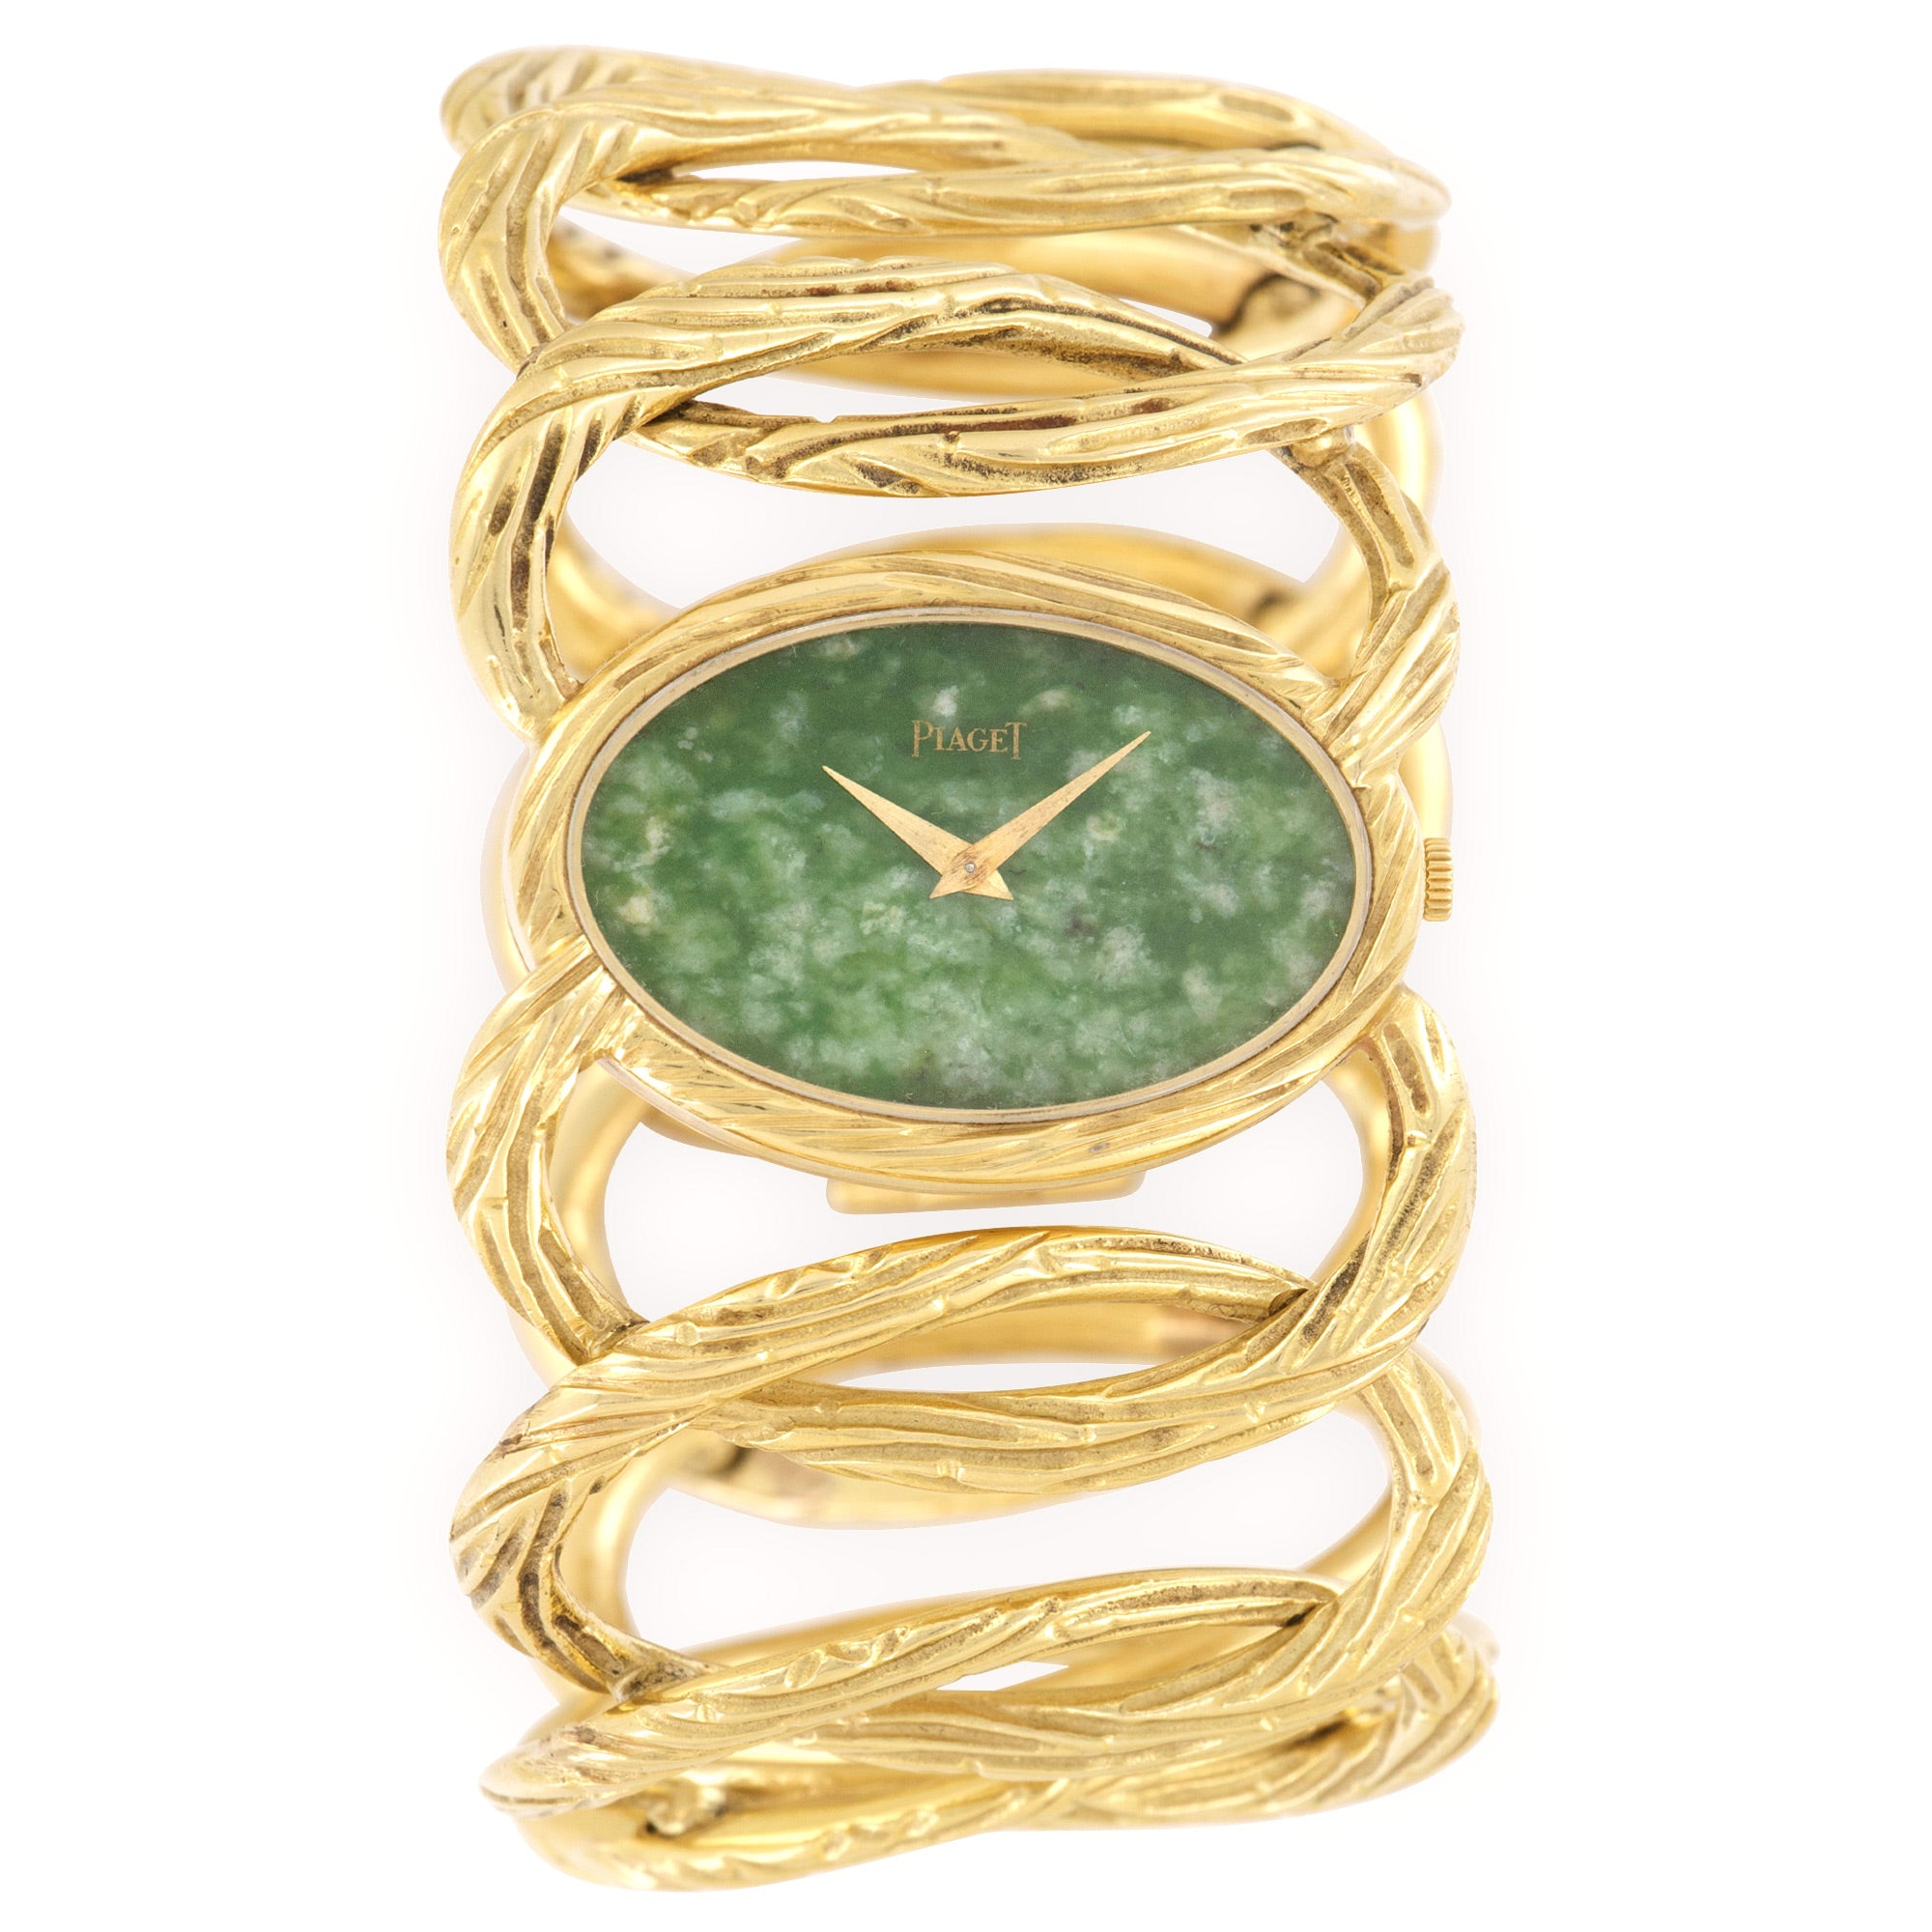 Piaget - Piaget Yellow Gold Bamboo Jade Watch, 1970s - The Keystone Watches